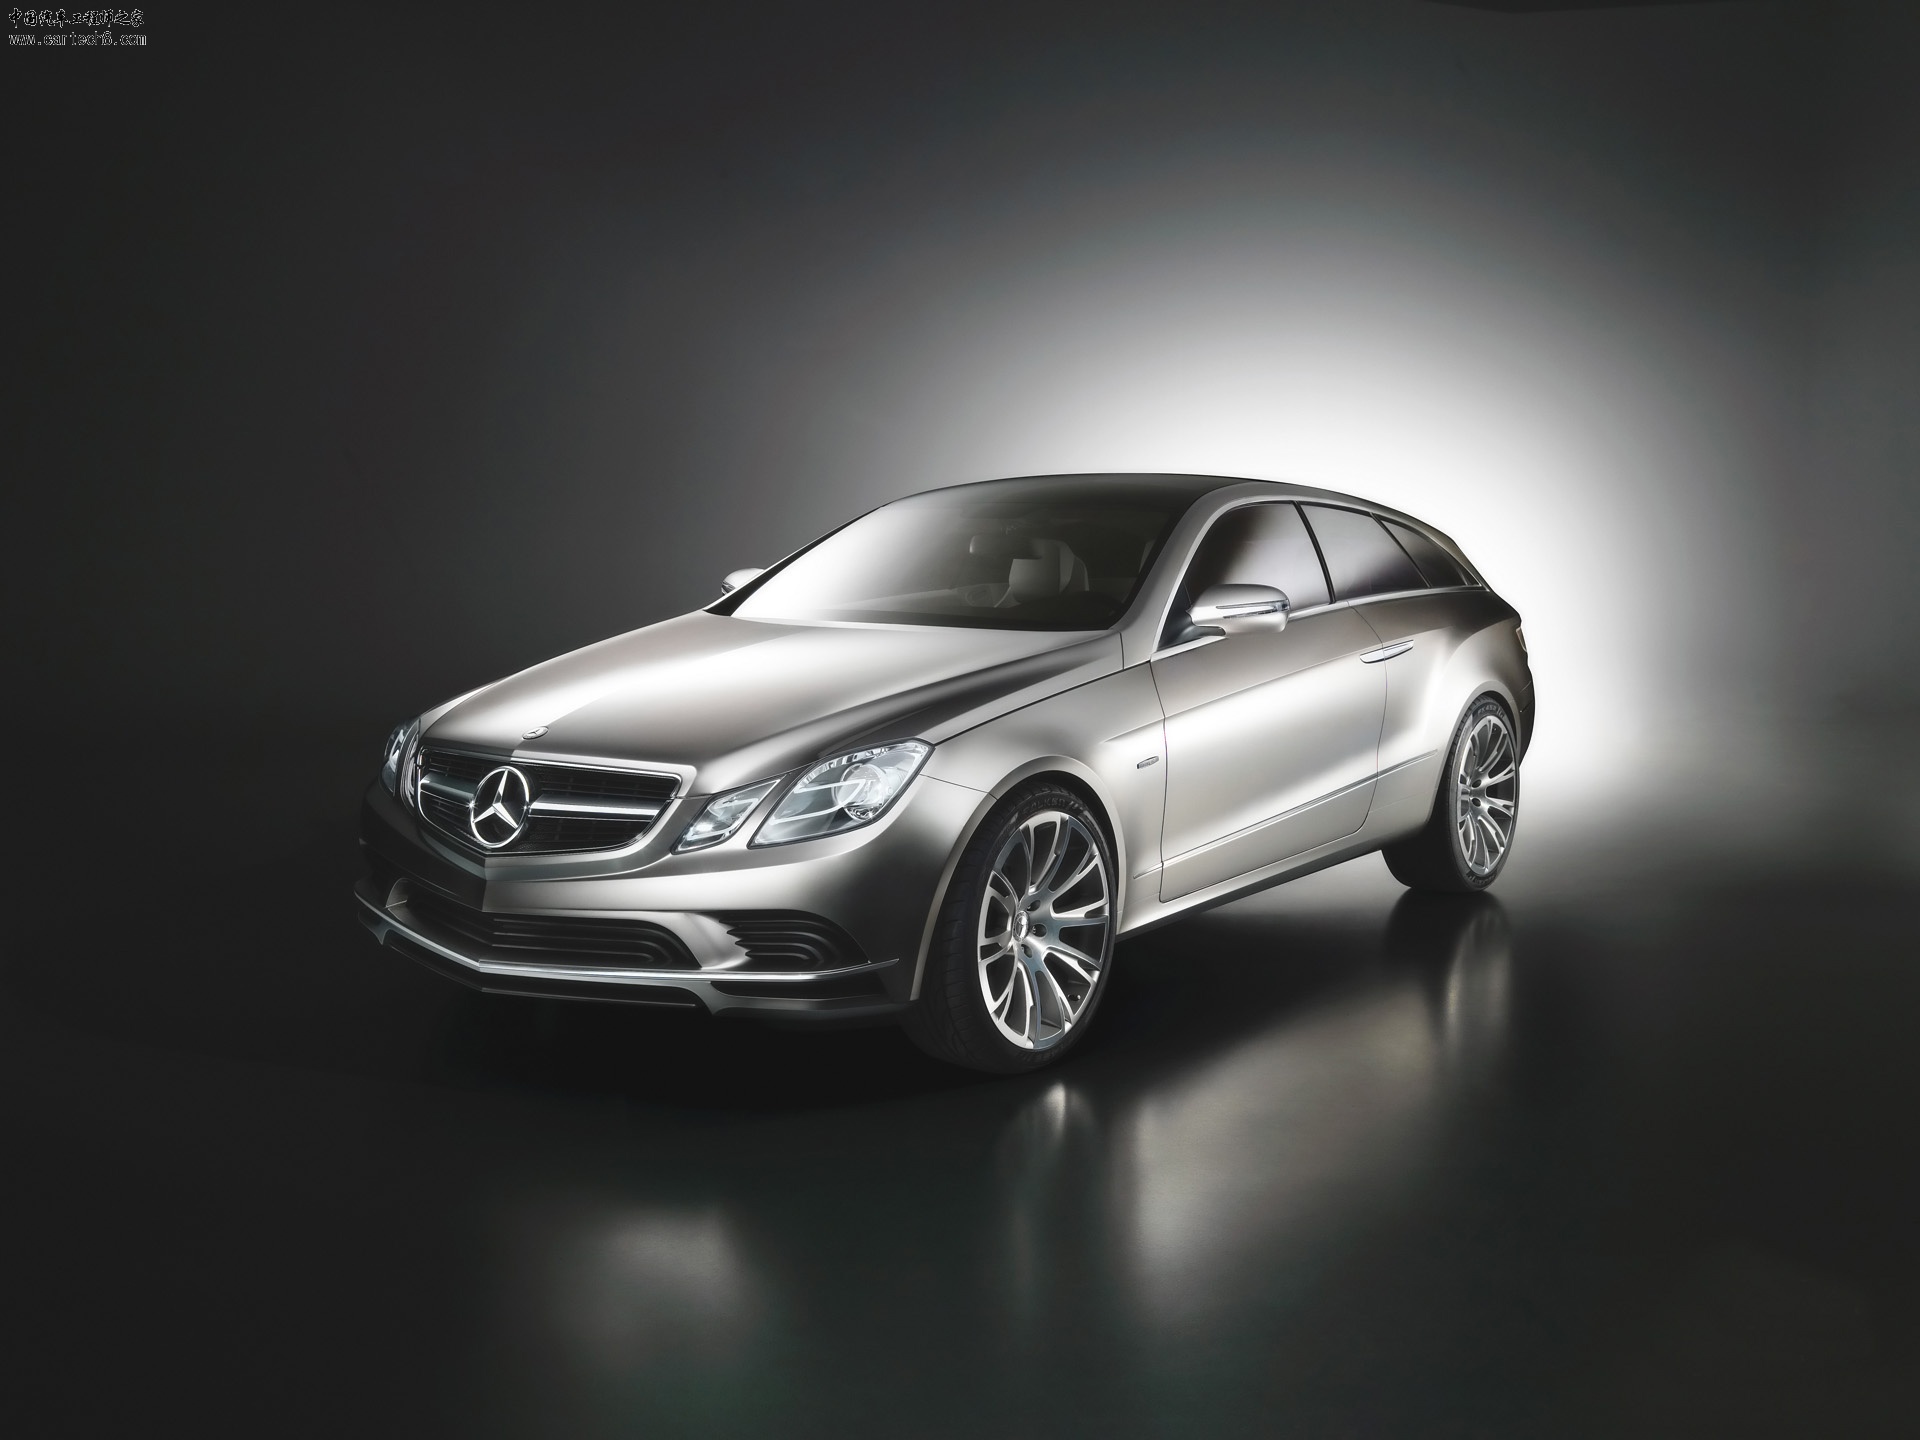 2008-Mercedes-Benz-ConceptFASCINATION-Front-And-Side-1920x1440.jpg